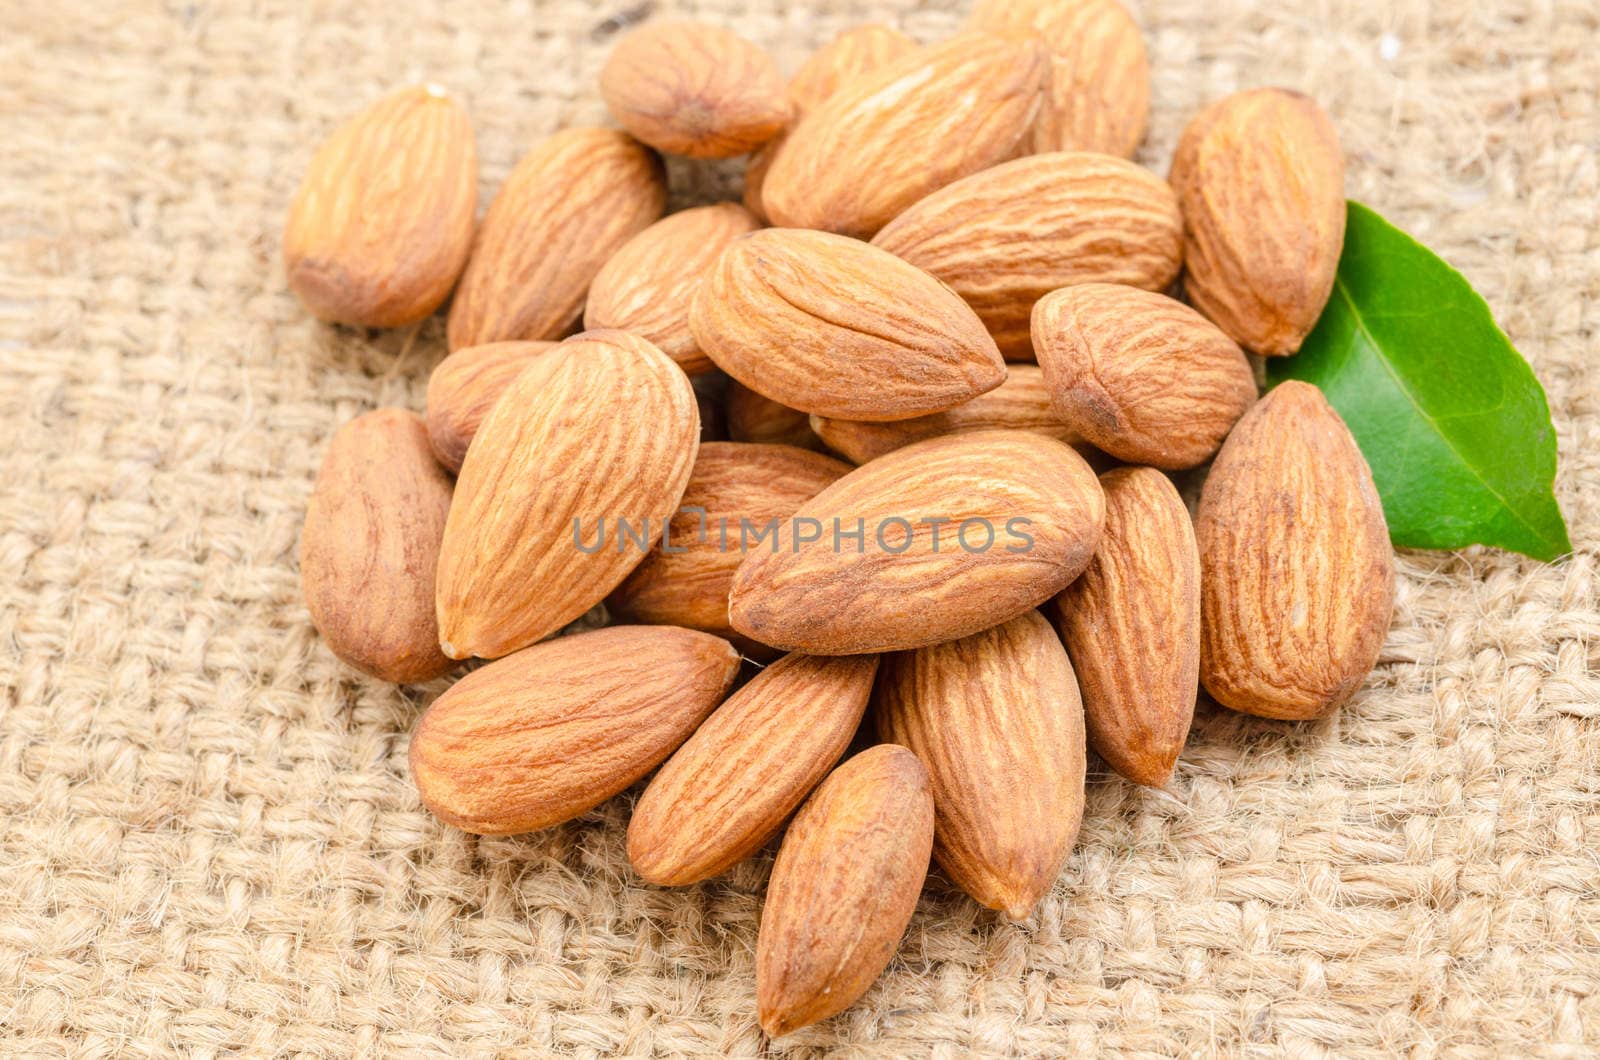 Raw almond with green leaf on sack background.